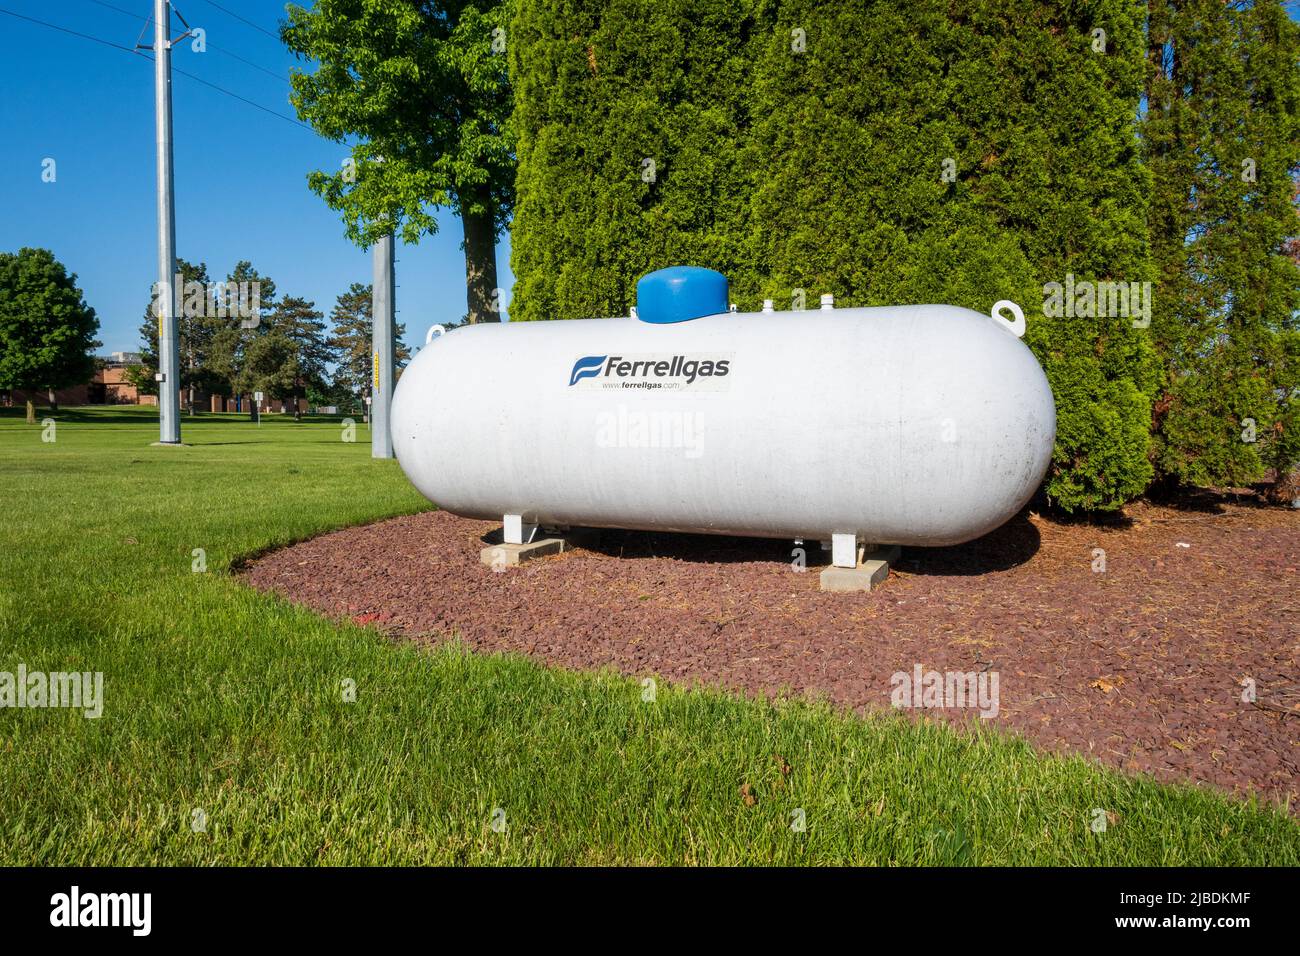 Cooking with gas: Propane vs. electric, Ferrellgas